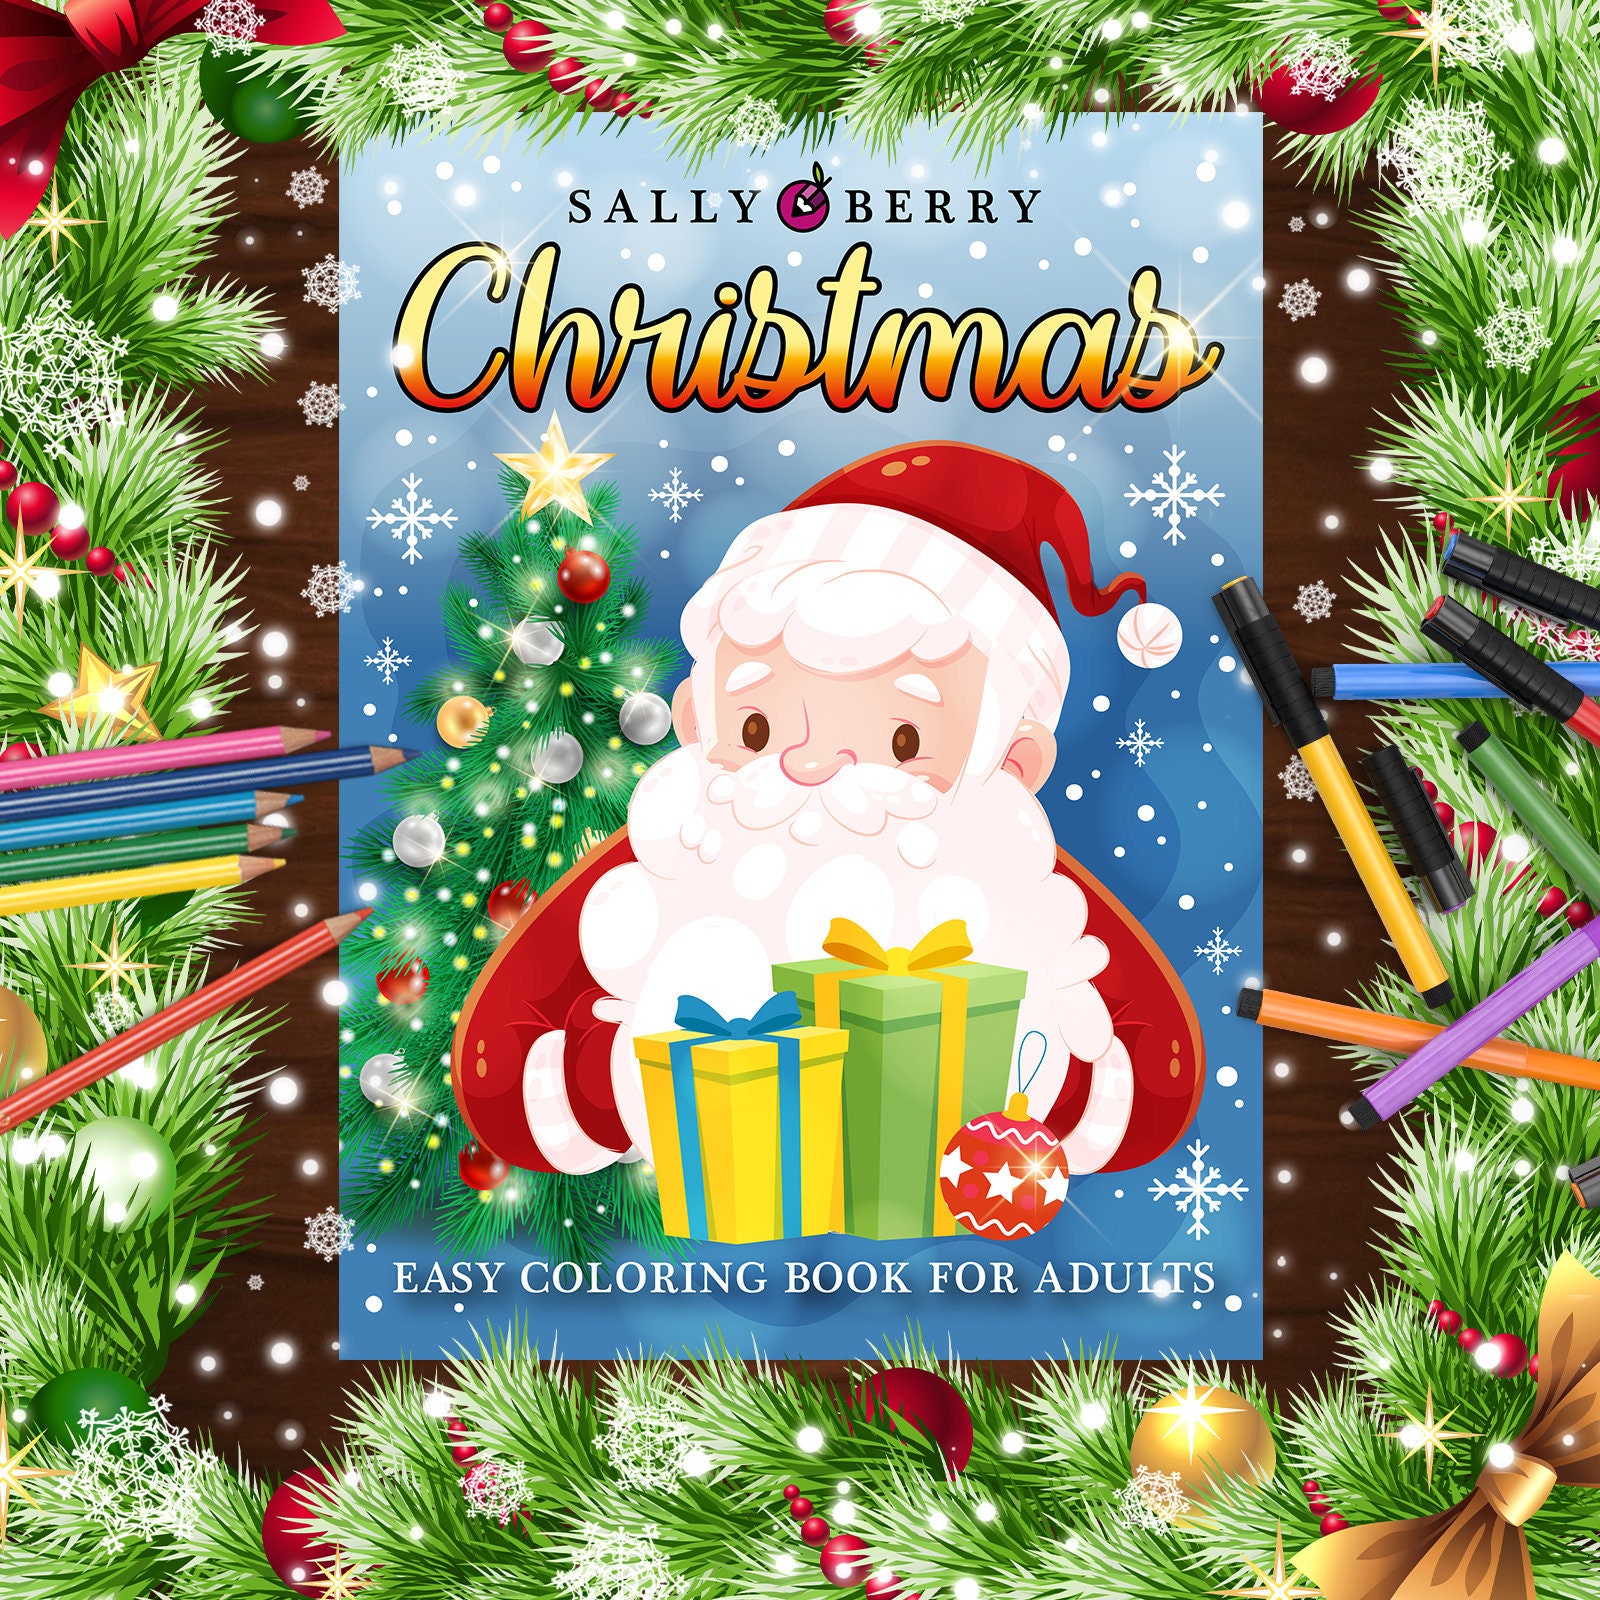 A Brighter Year - Very Merry Mini Coloring Book, Holiday, Christmas, Gift,  Stocking Stuffer, 50 Pages of Anxiety + Stress Relief [1 Pack]